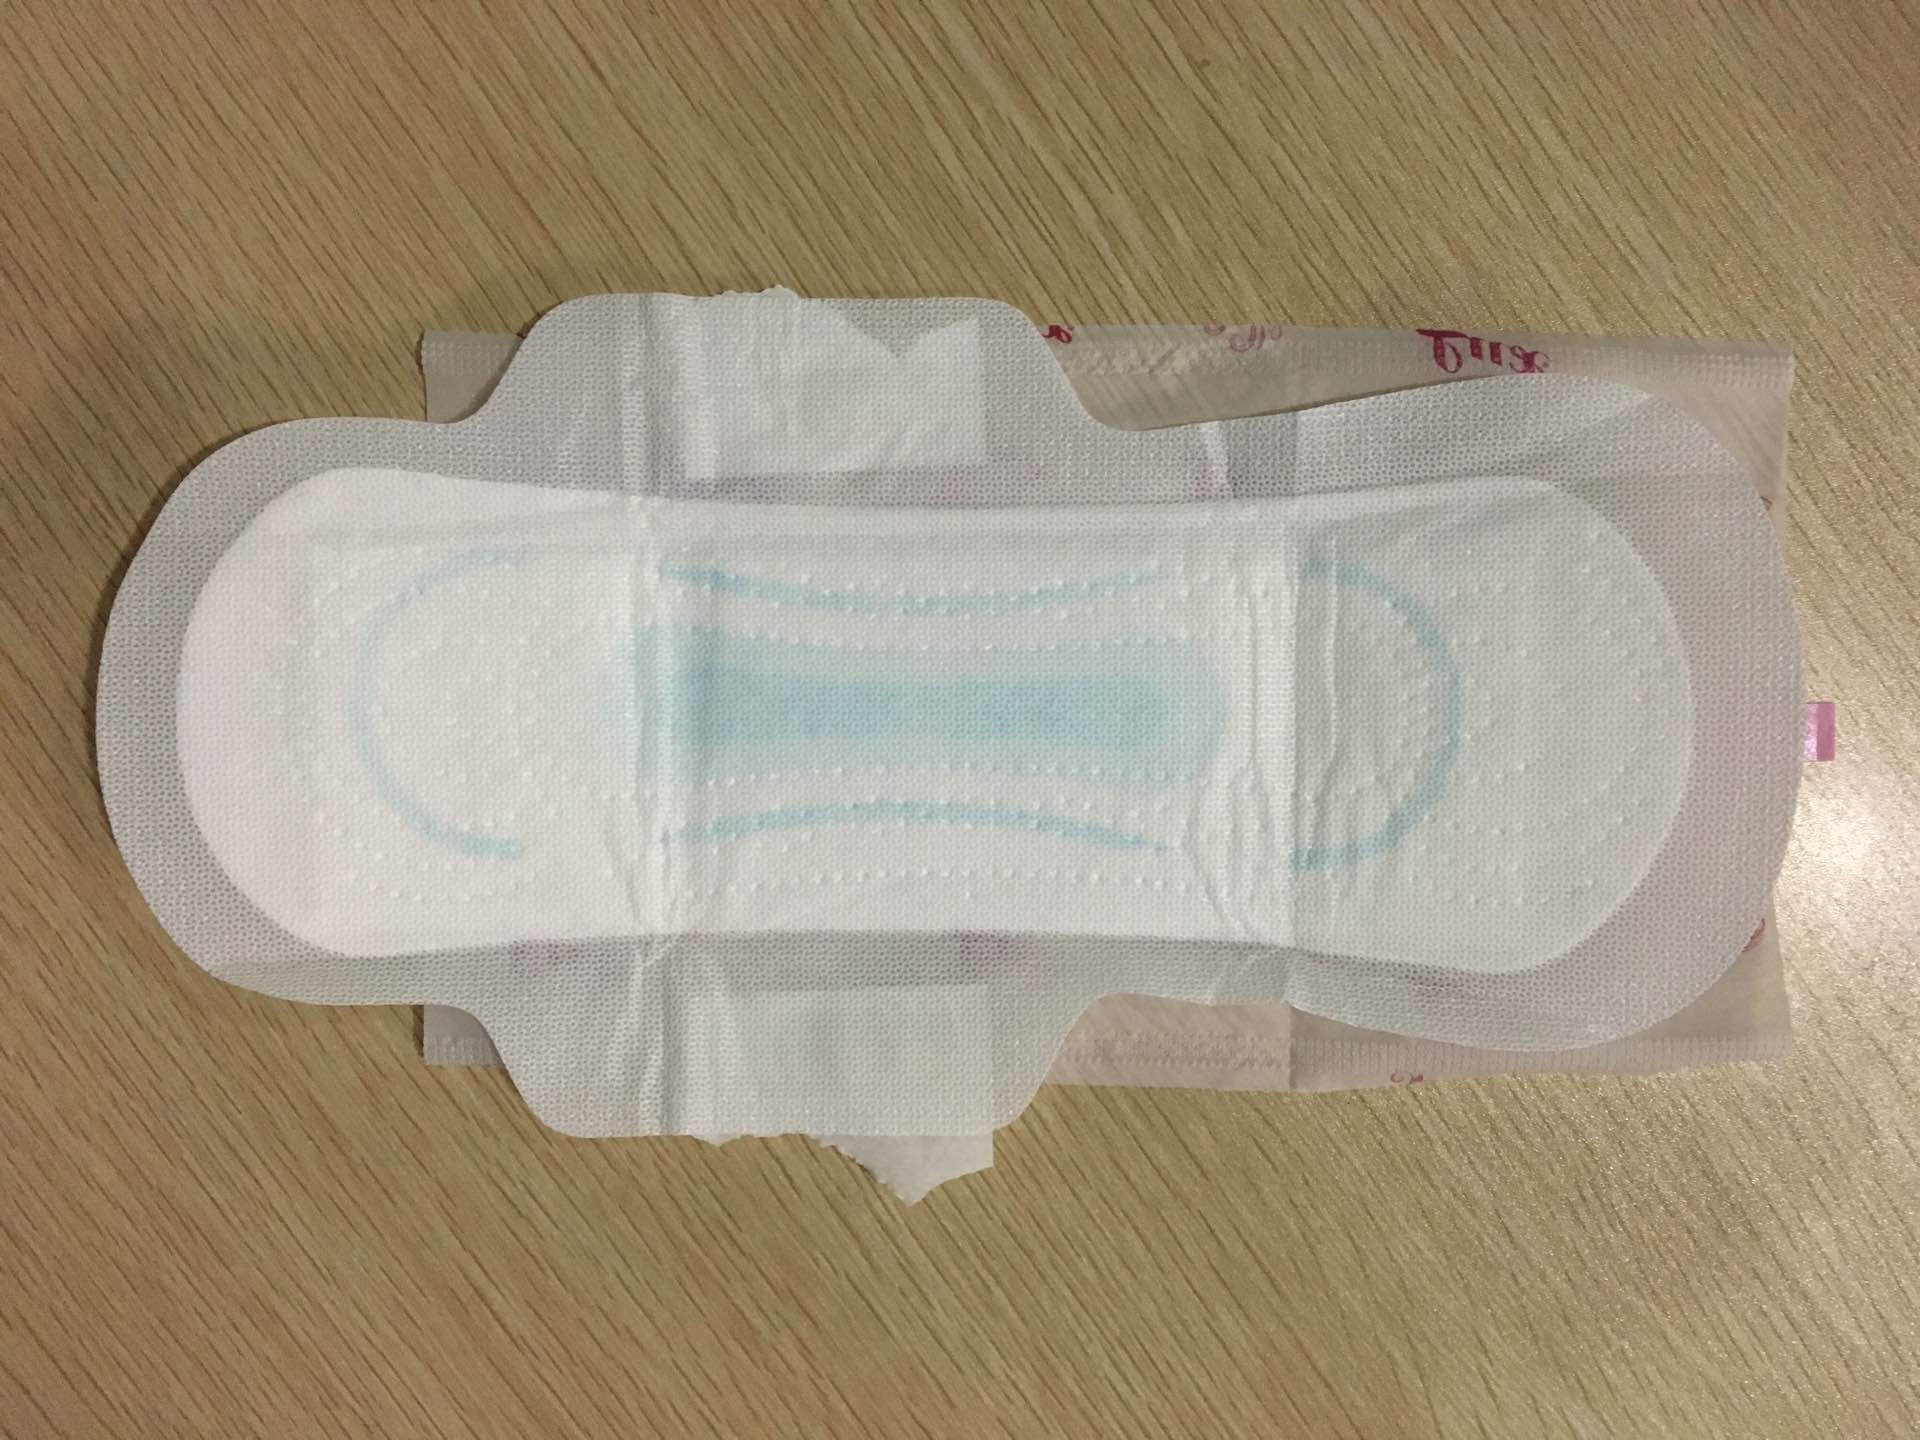 Over Night Use Anion Sanitary Napkins Extra Long Naturally Ladies Pads Physiological Periods Towel Supplier Soft Custom Top OEM